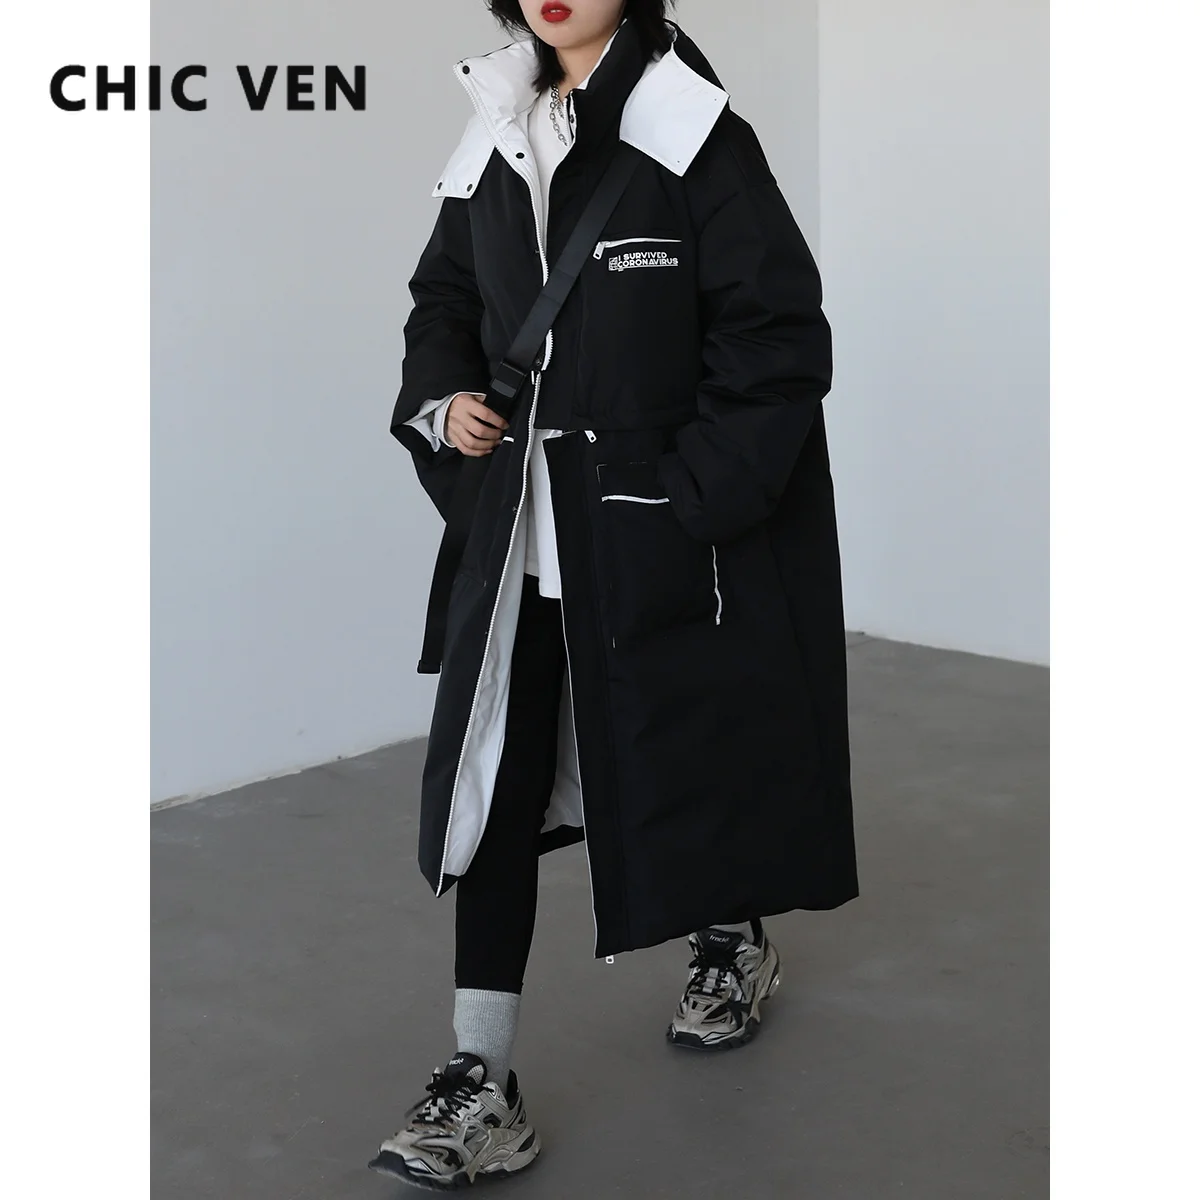 CHIC VEN Women's Down Coat Contrast Color Splicing Design Stand Collar Hooded Down Jacket Winter Thick Warm Lady Overcoat Tops